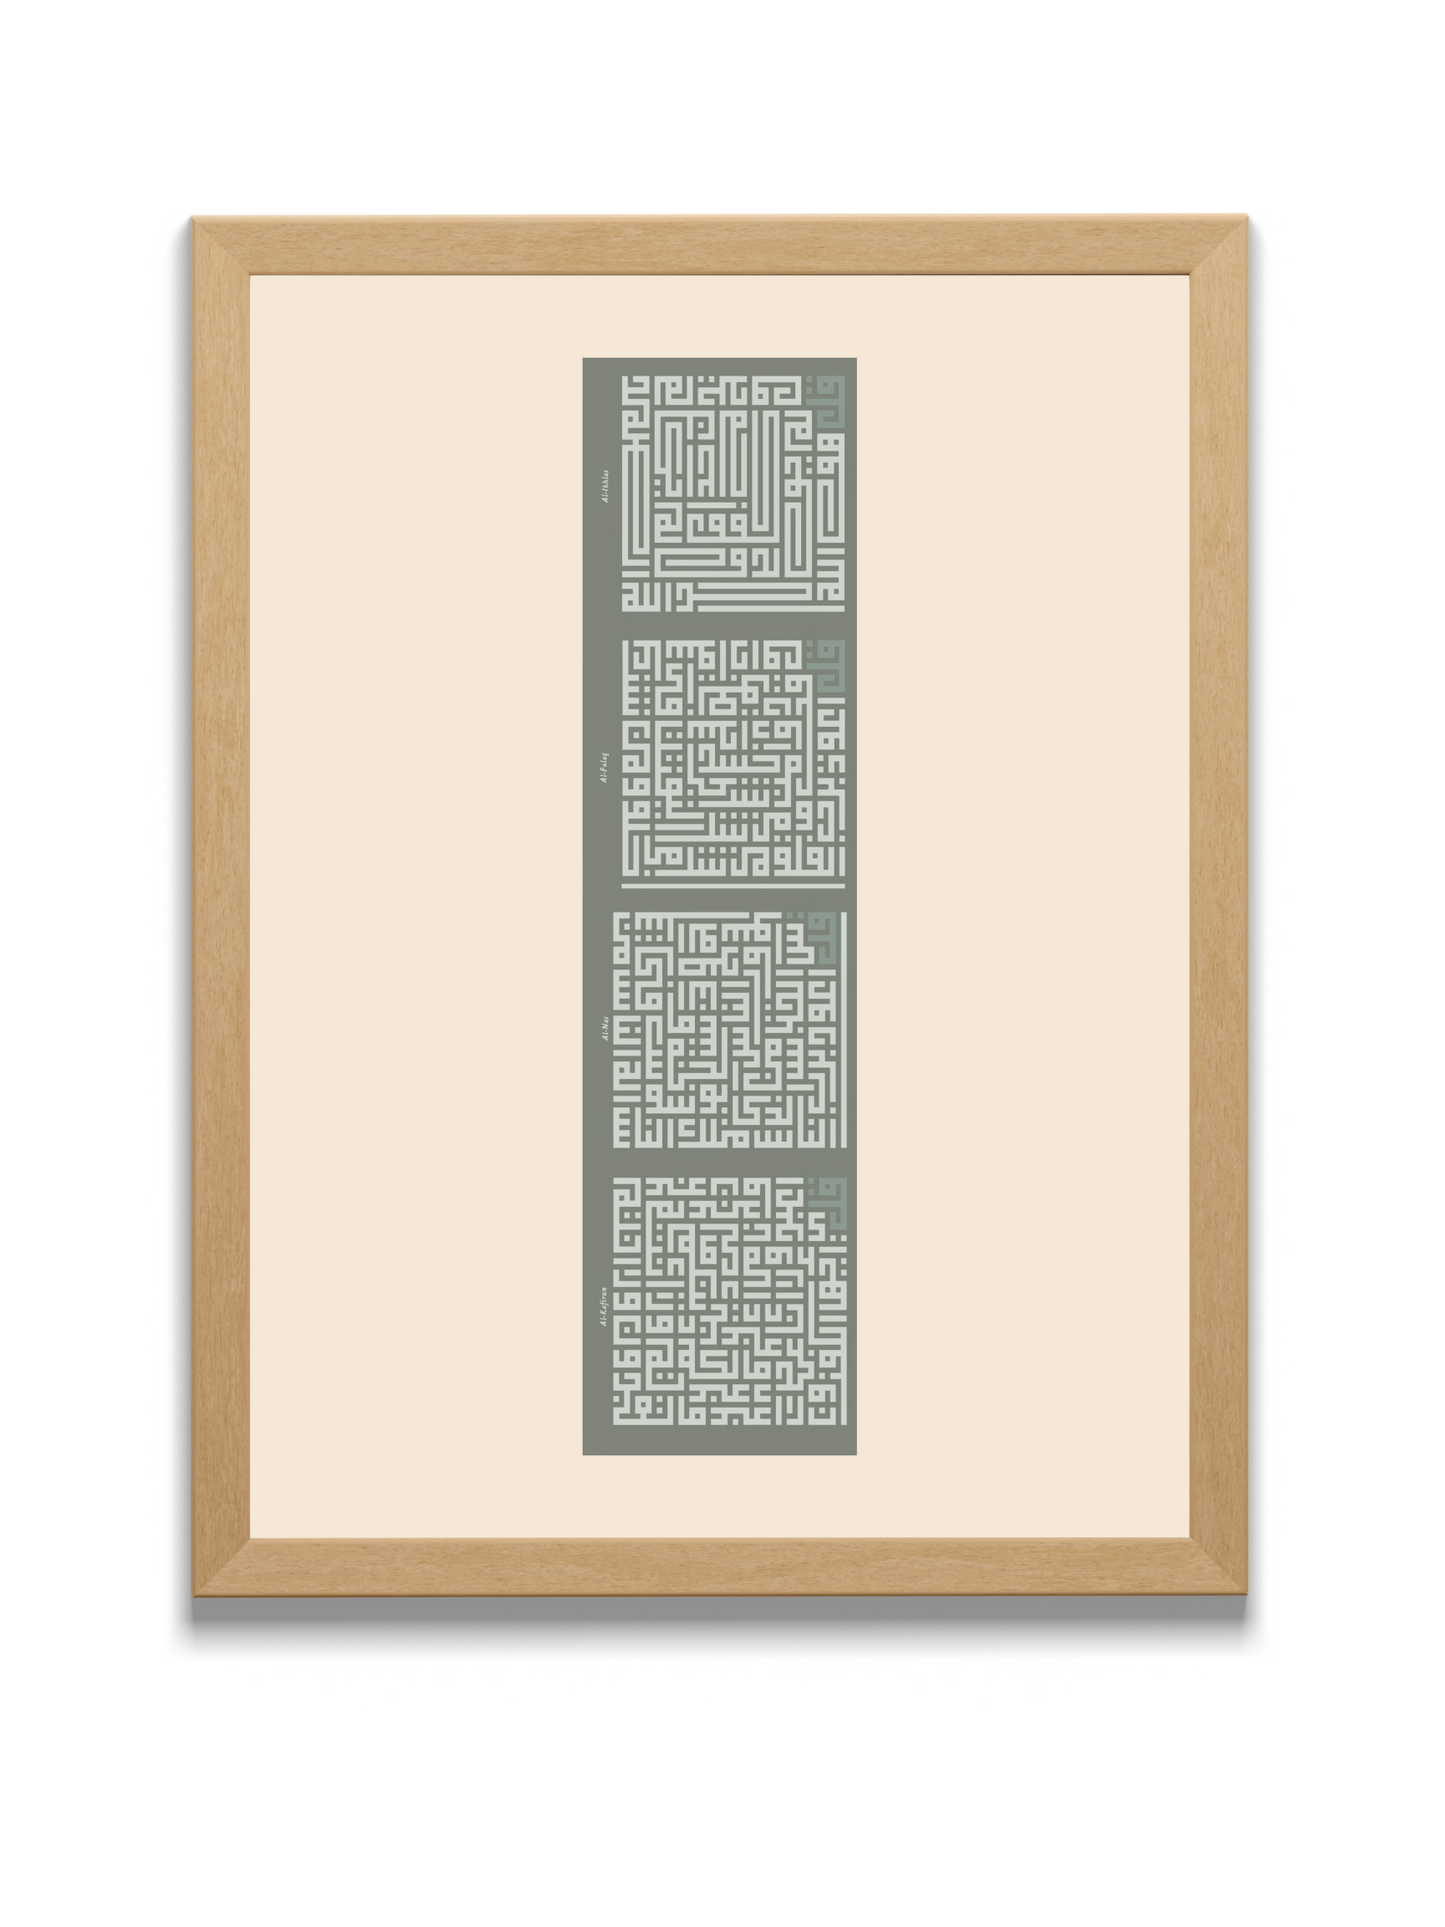 Four "QULs" | Quran | Kufic Square Calligraphy | Beige